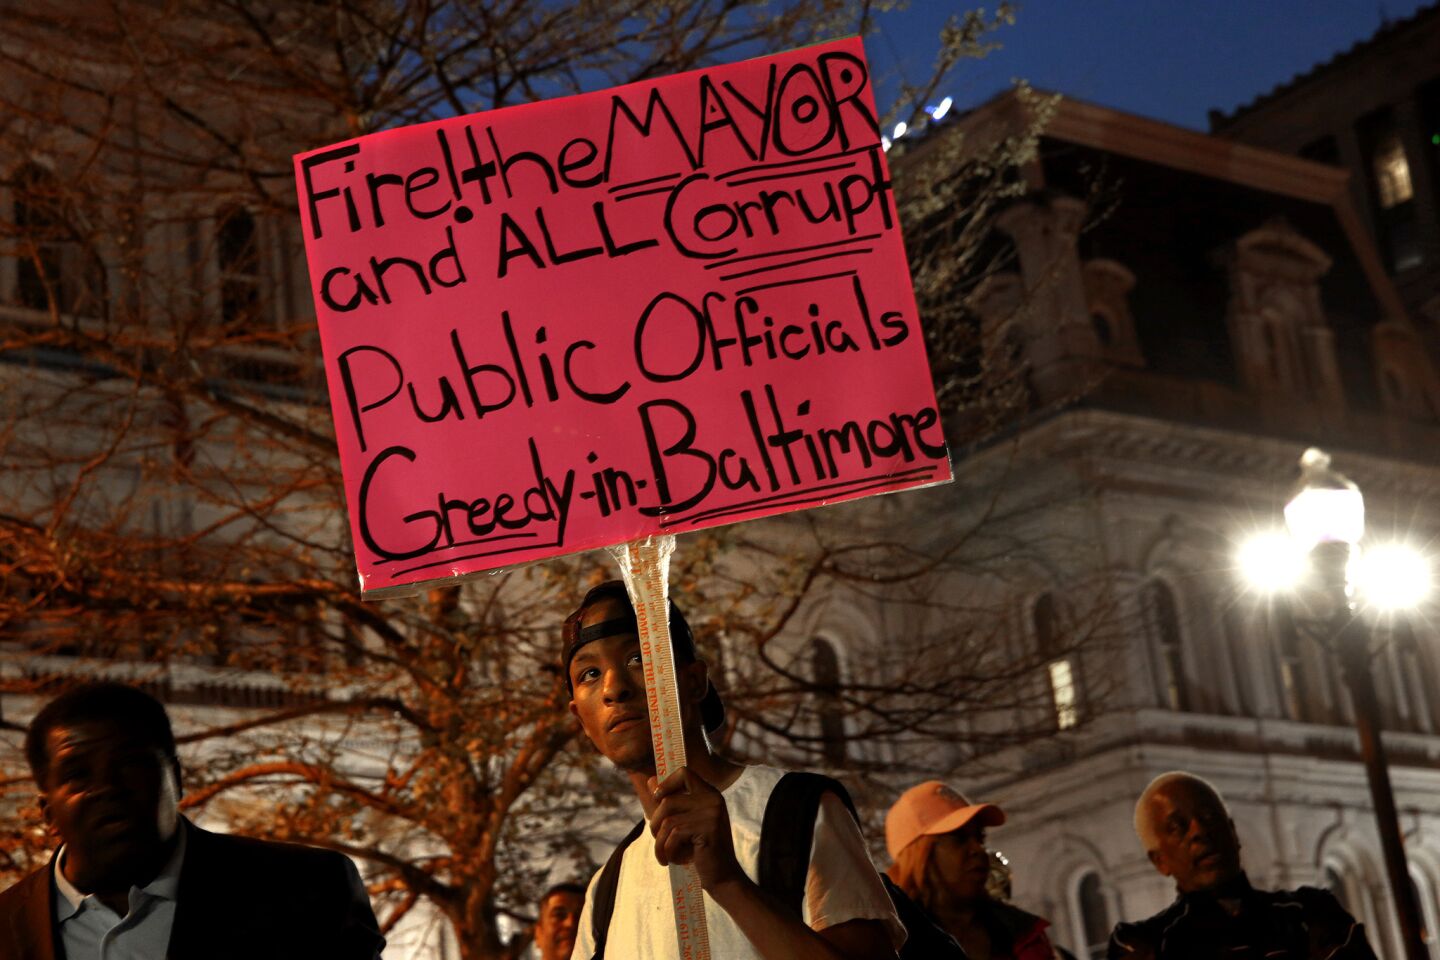 Outside Baltimore City Hall, protesters gather to denounce municipal officials.